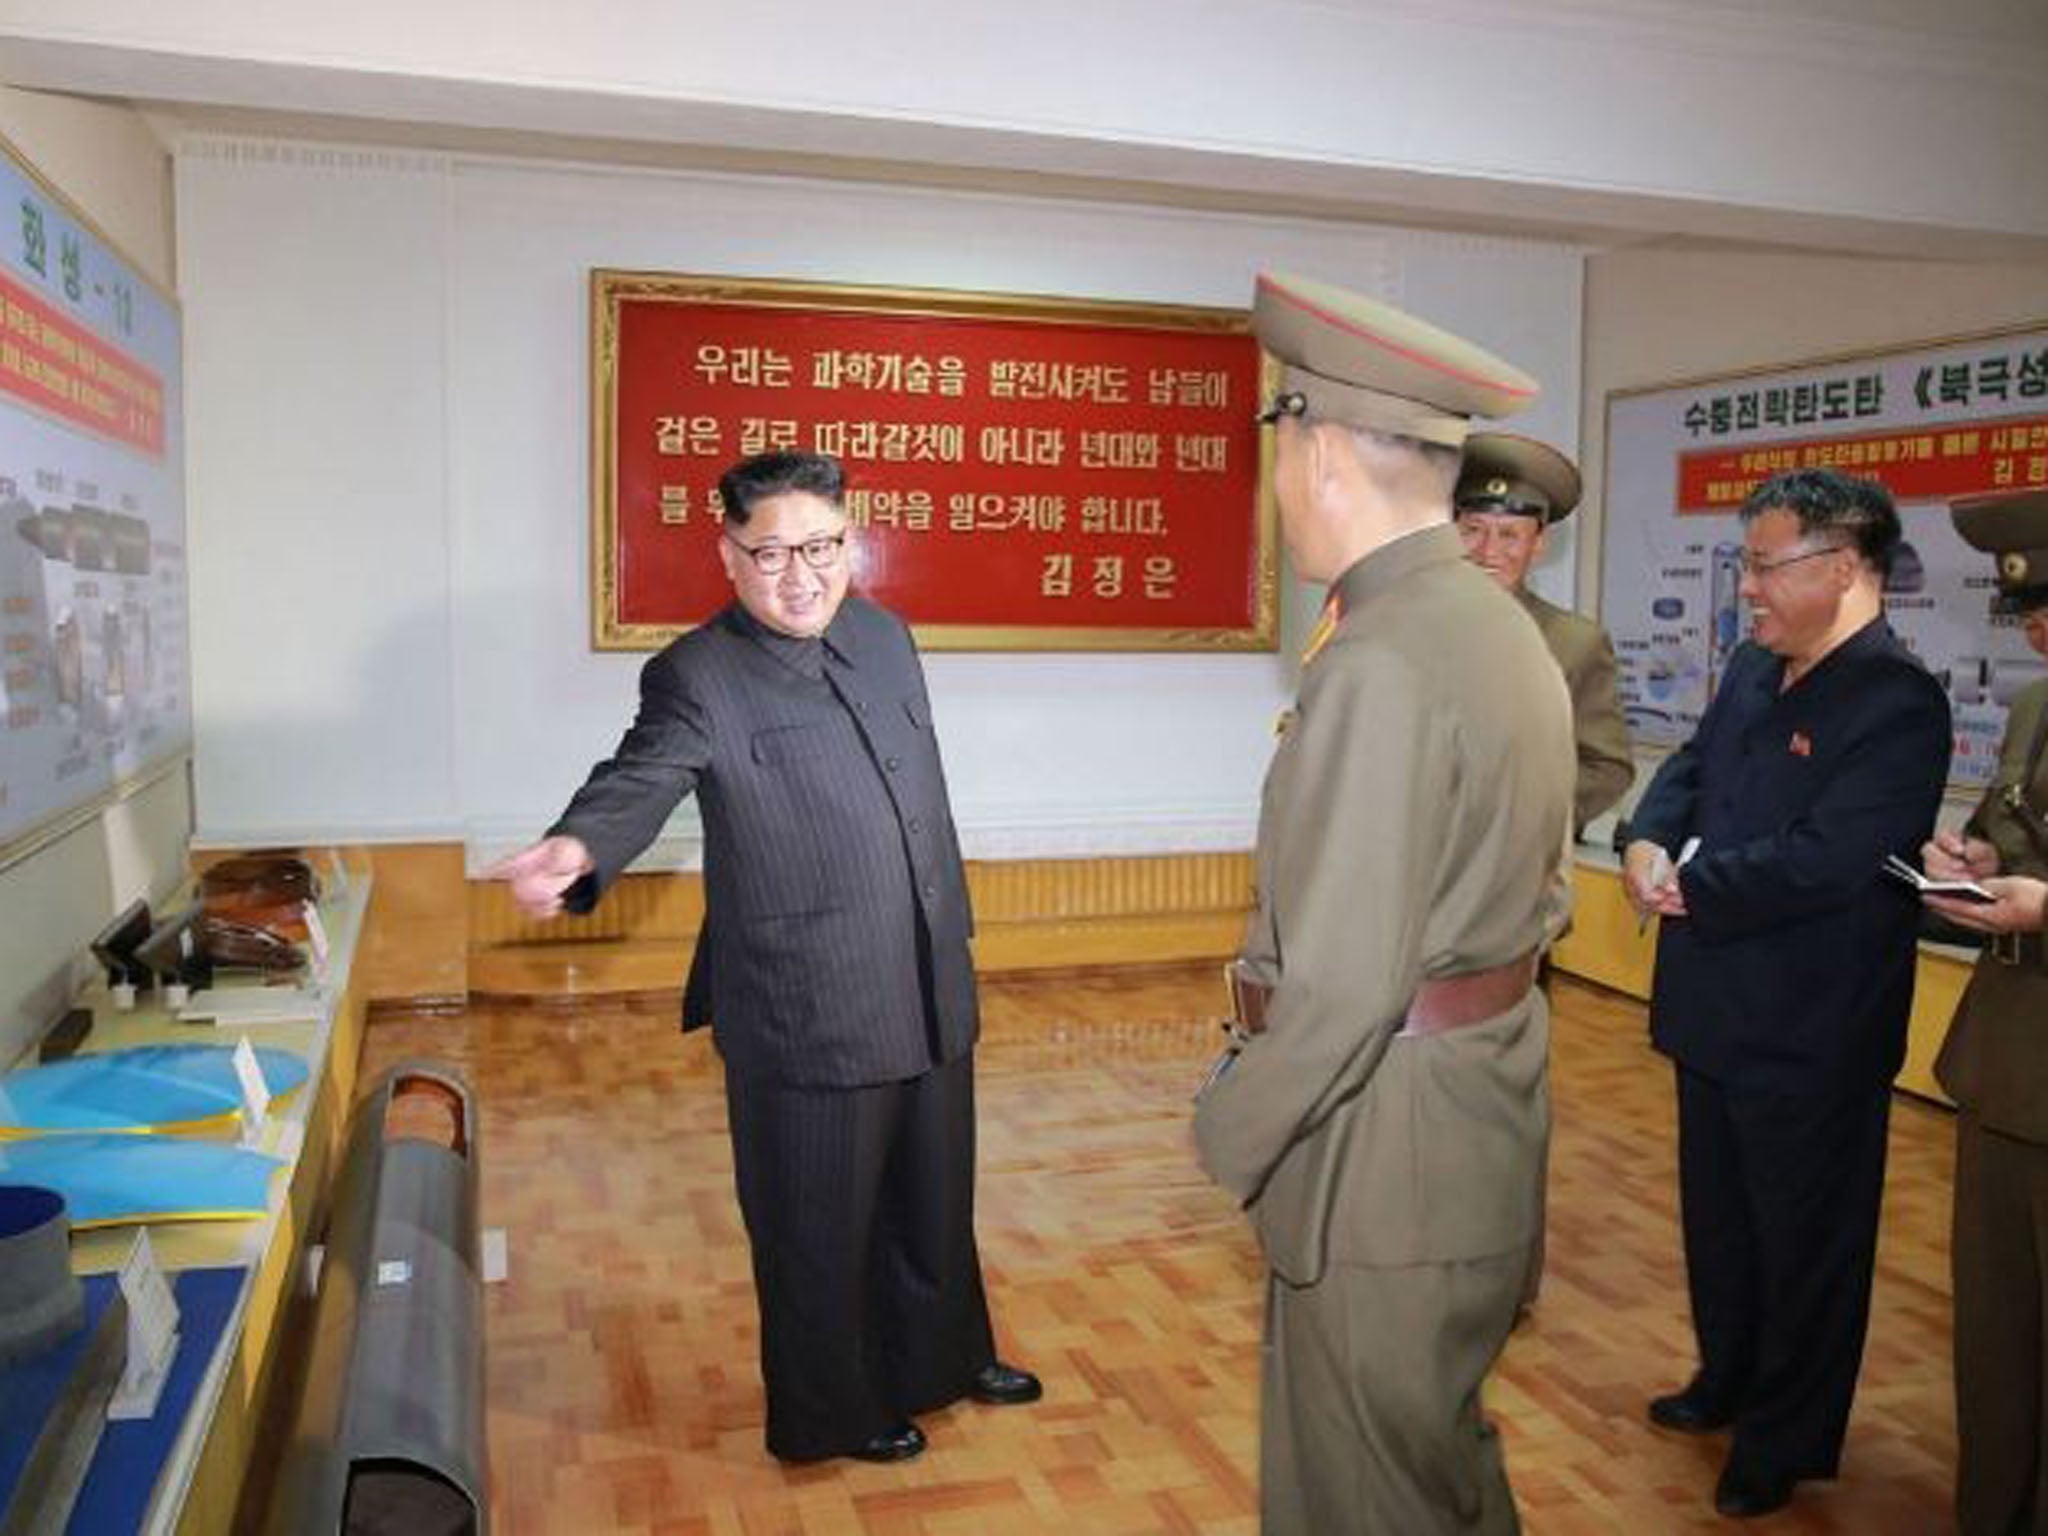 The undated picture shows Kim Jong-un surrounded by plans for new weapons